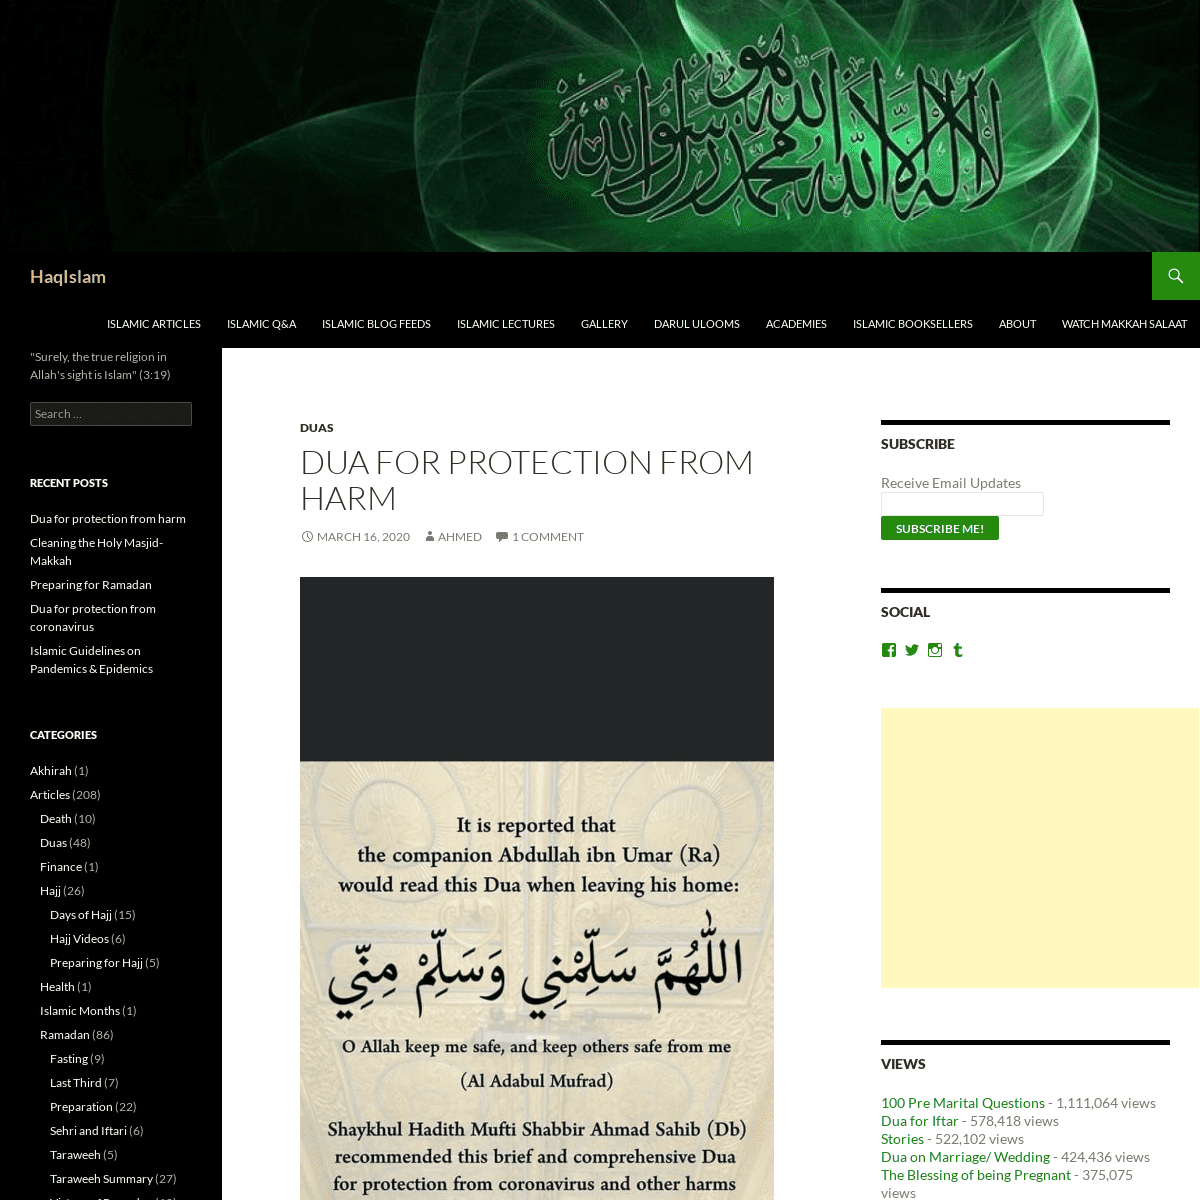 A complete backup of haqislam.org